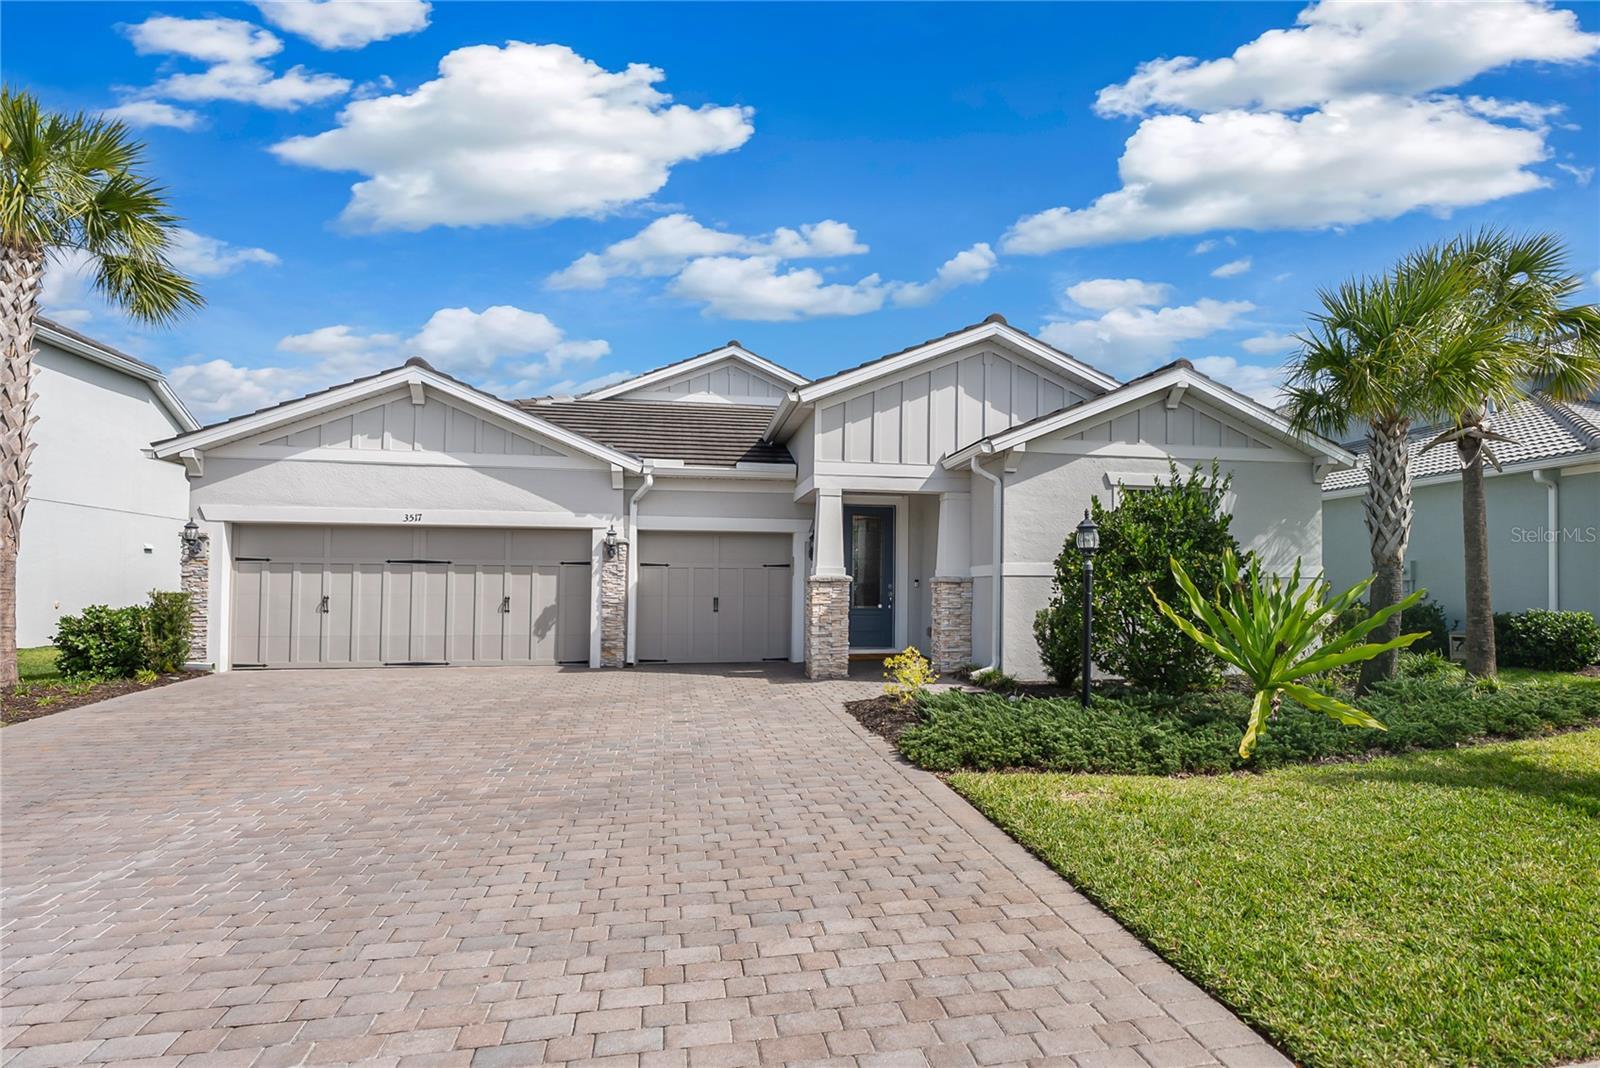 Photo one of 3517 Anchor Bay Trl Lakewood Ranch FL 34211 | MLS A4599887